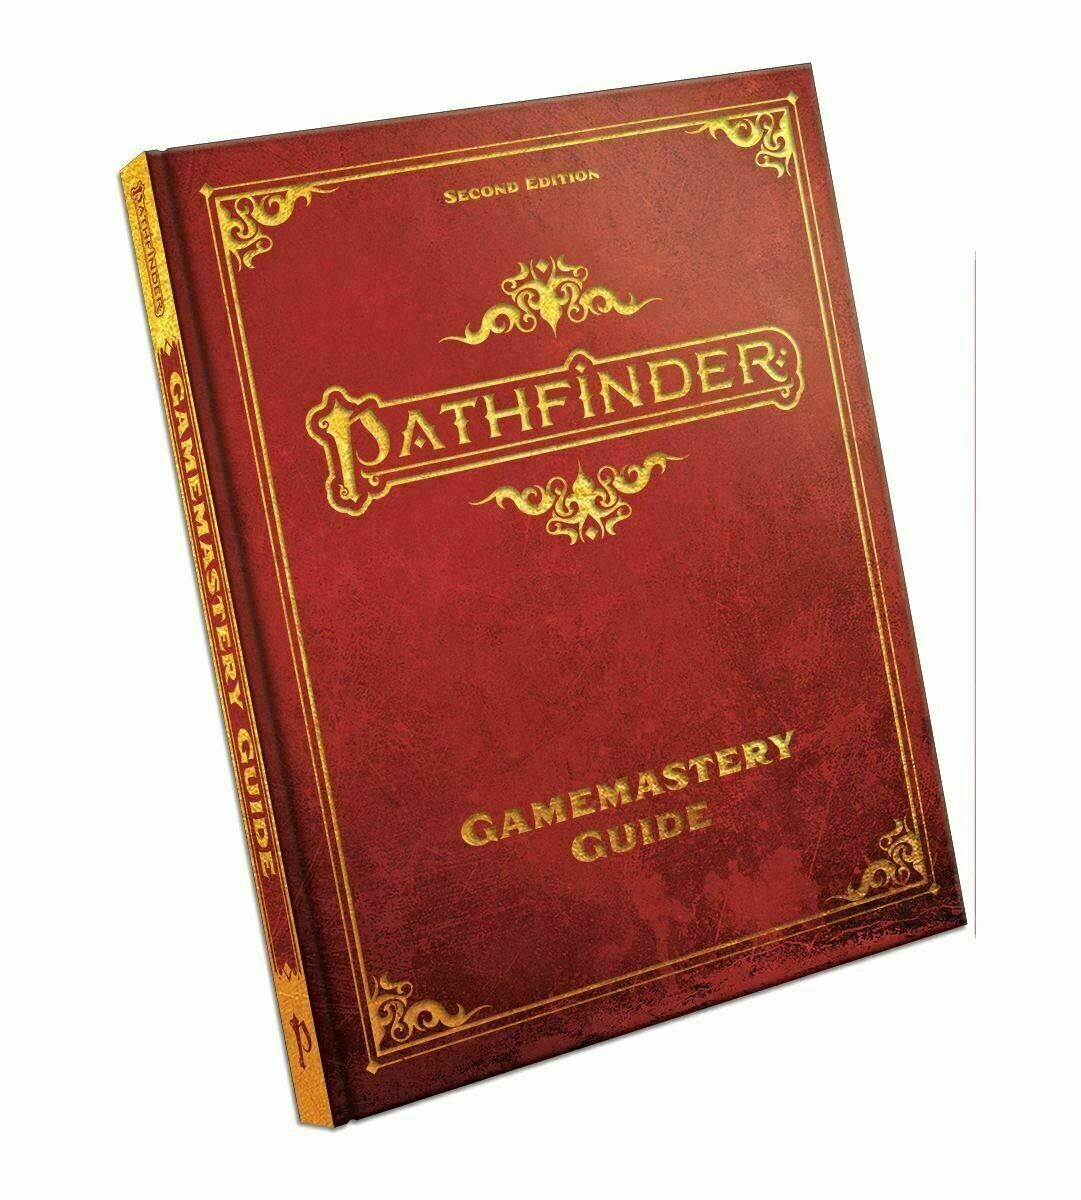 Pathfinder GameMastery Guide - Special Edition 2nd Edition - EN